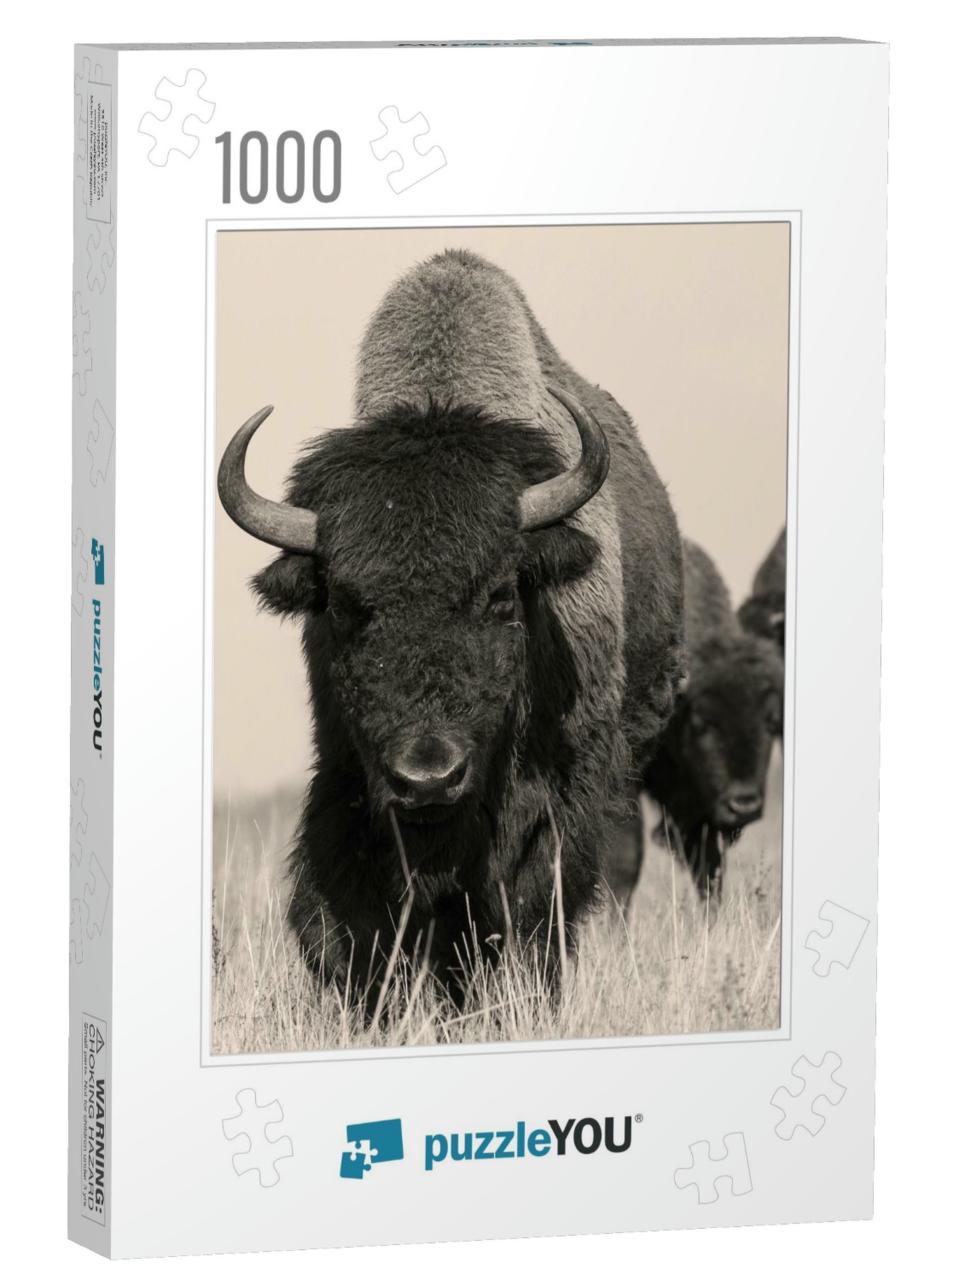 American Bison or Buffalo in Sepia. the Herd of American... Jigsaw Puzzle with 1000 pieces